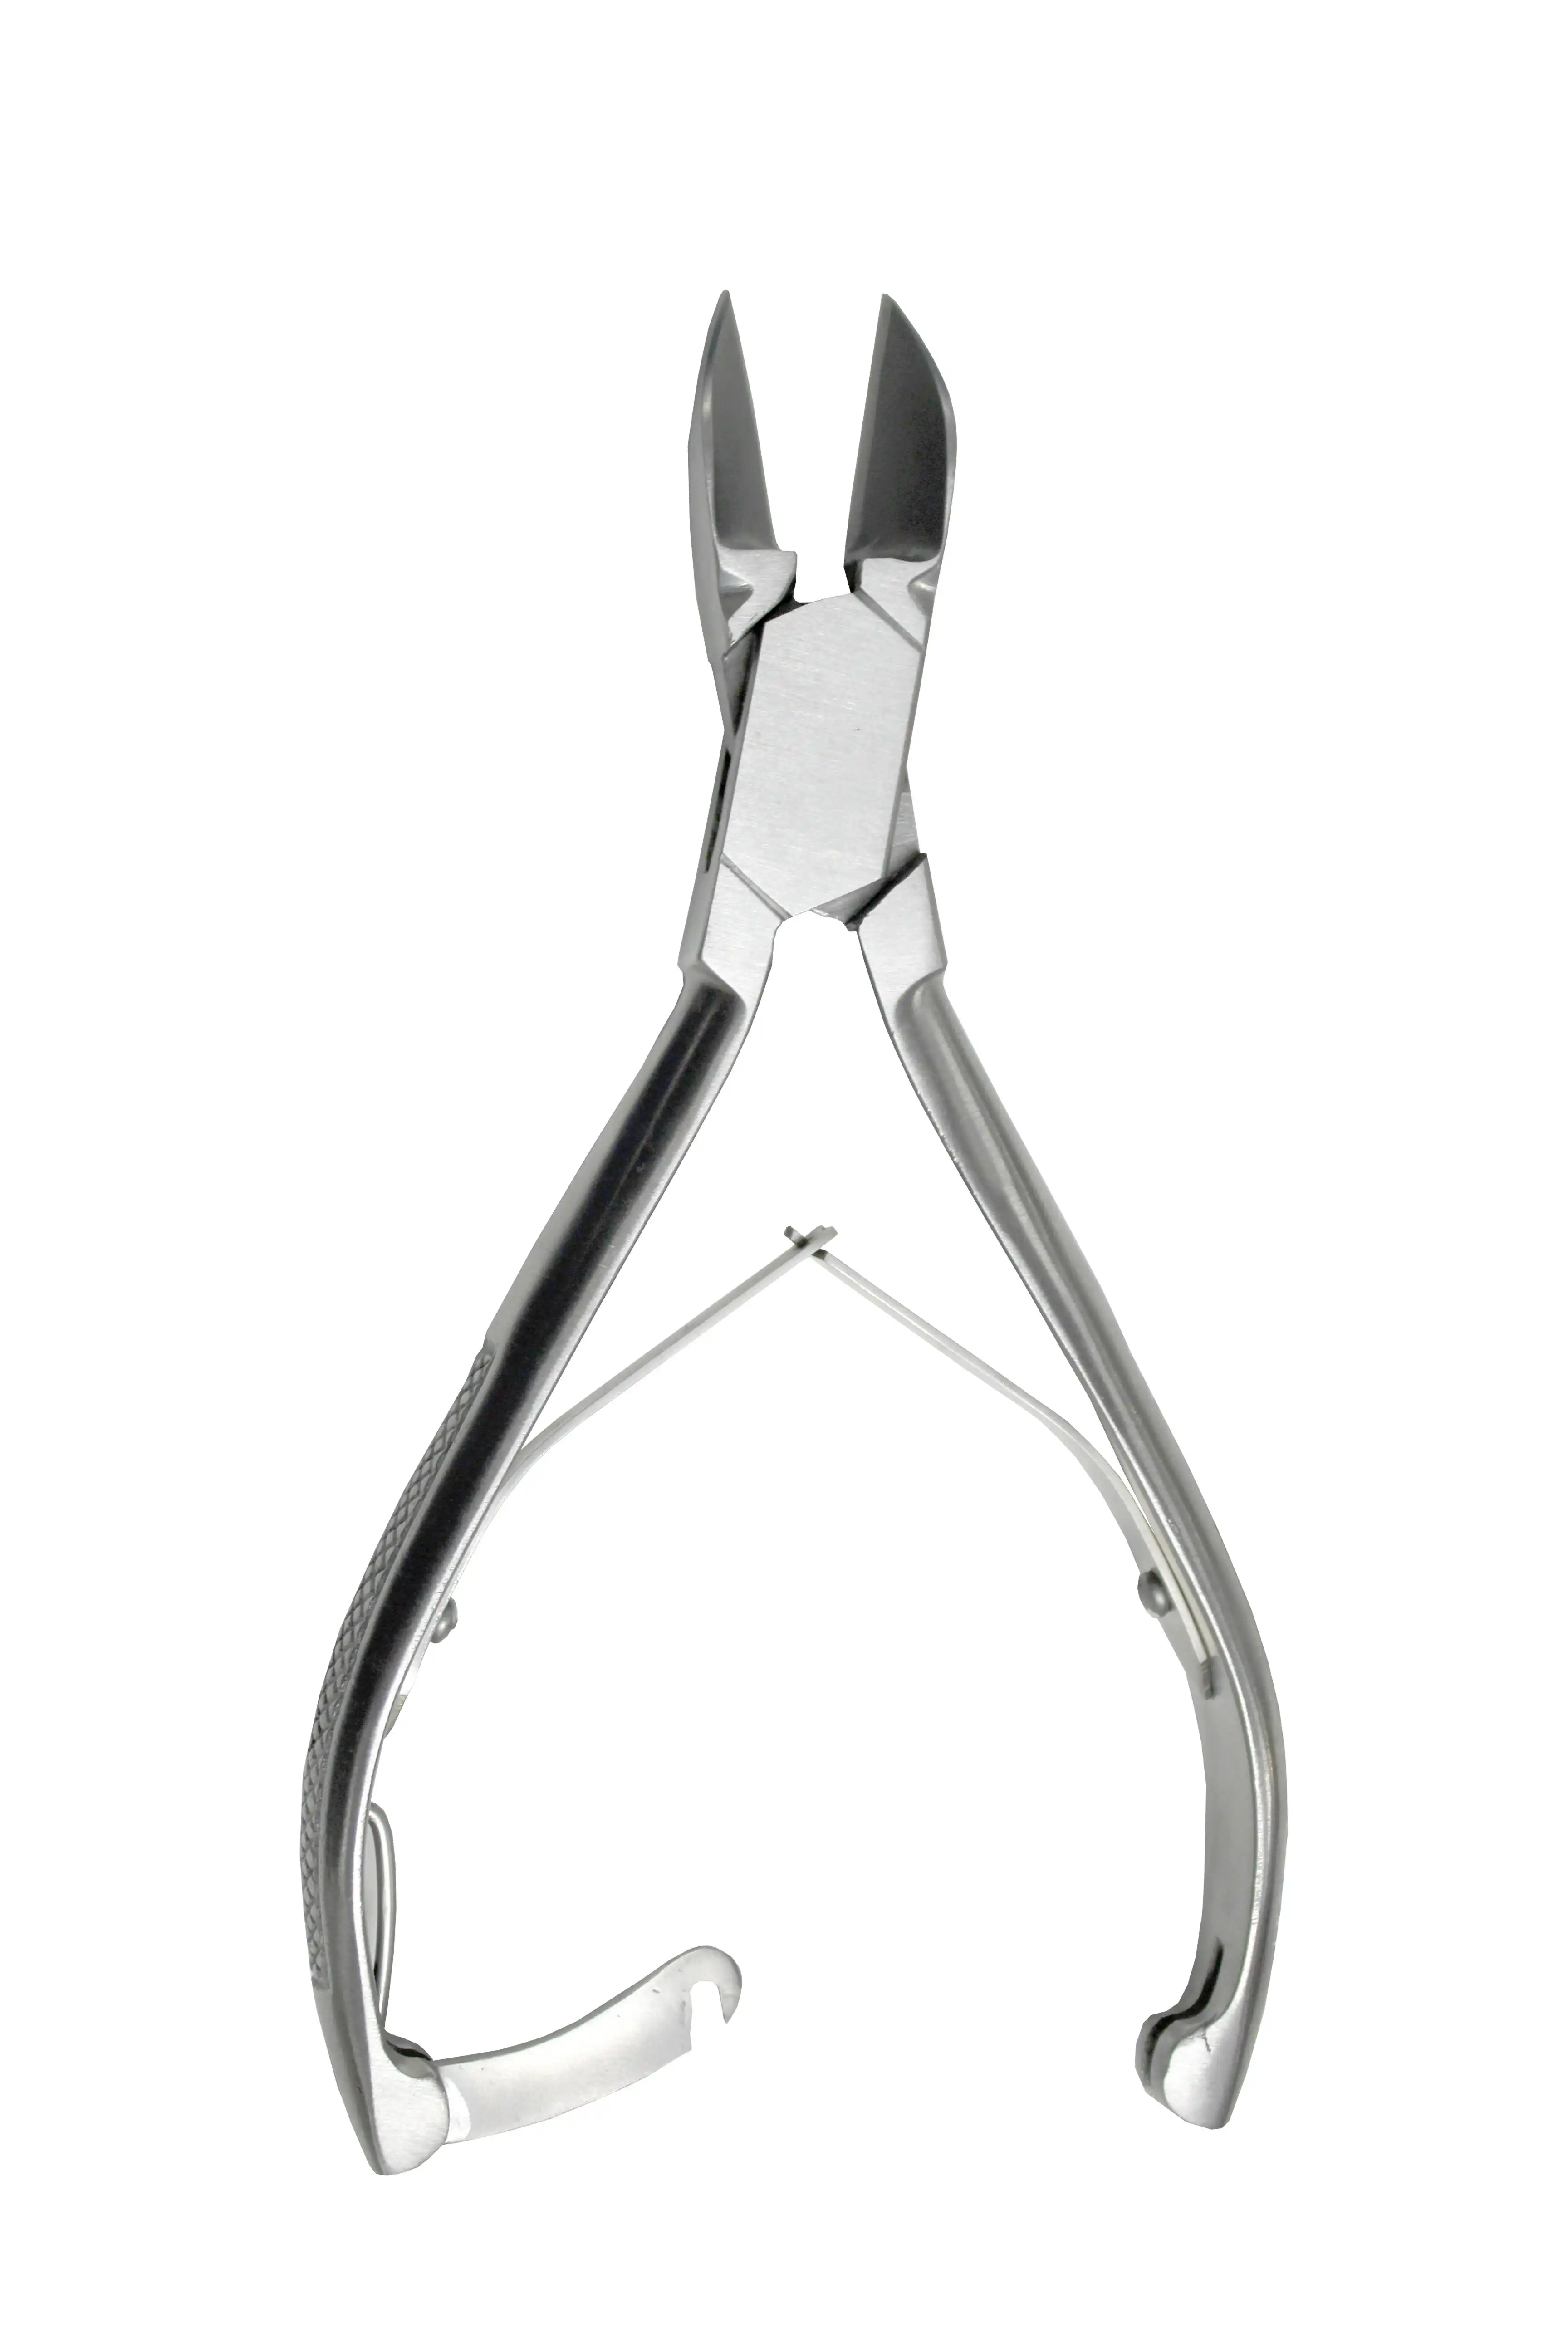 Livingstone Bone Cutter or Nail Clipper, 160mm Long, 5.5 x 2.5mm Curved Jaw, Two Arms, 139 grams, Stainless Steel, Each